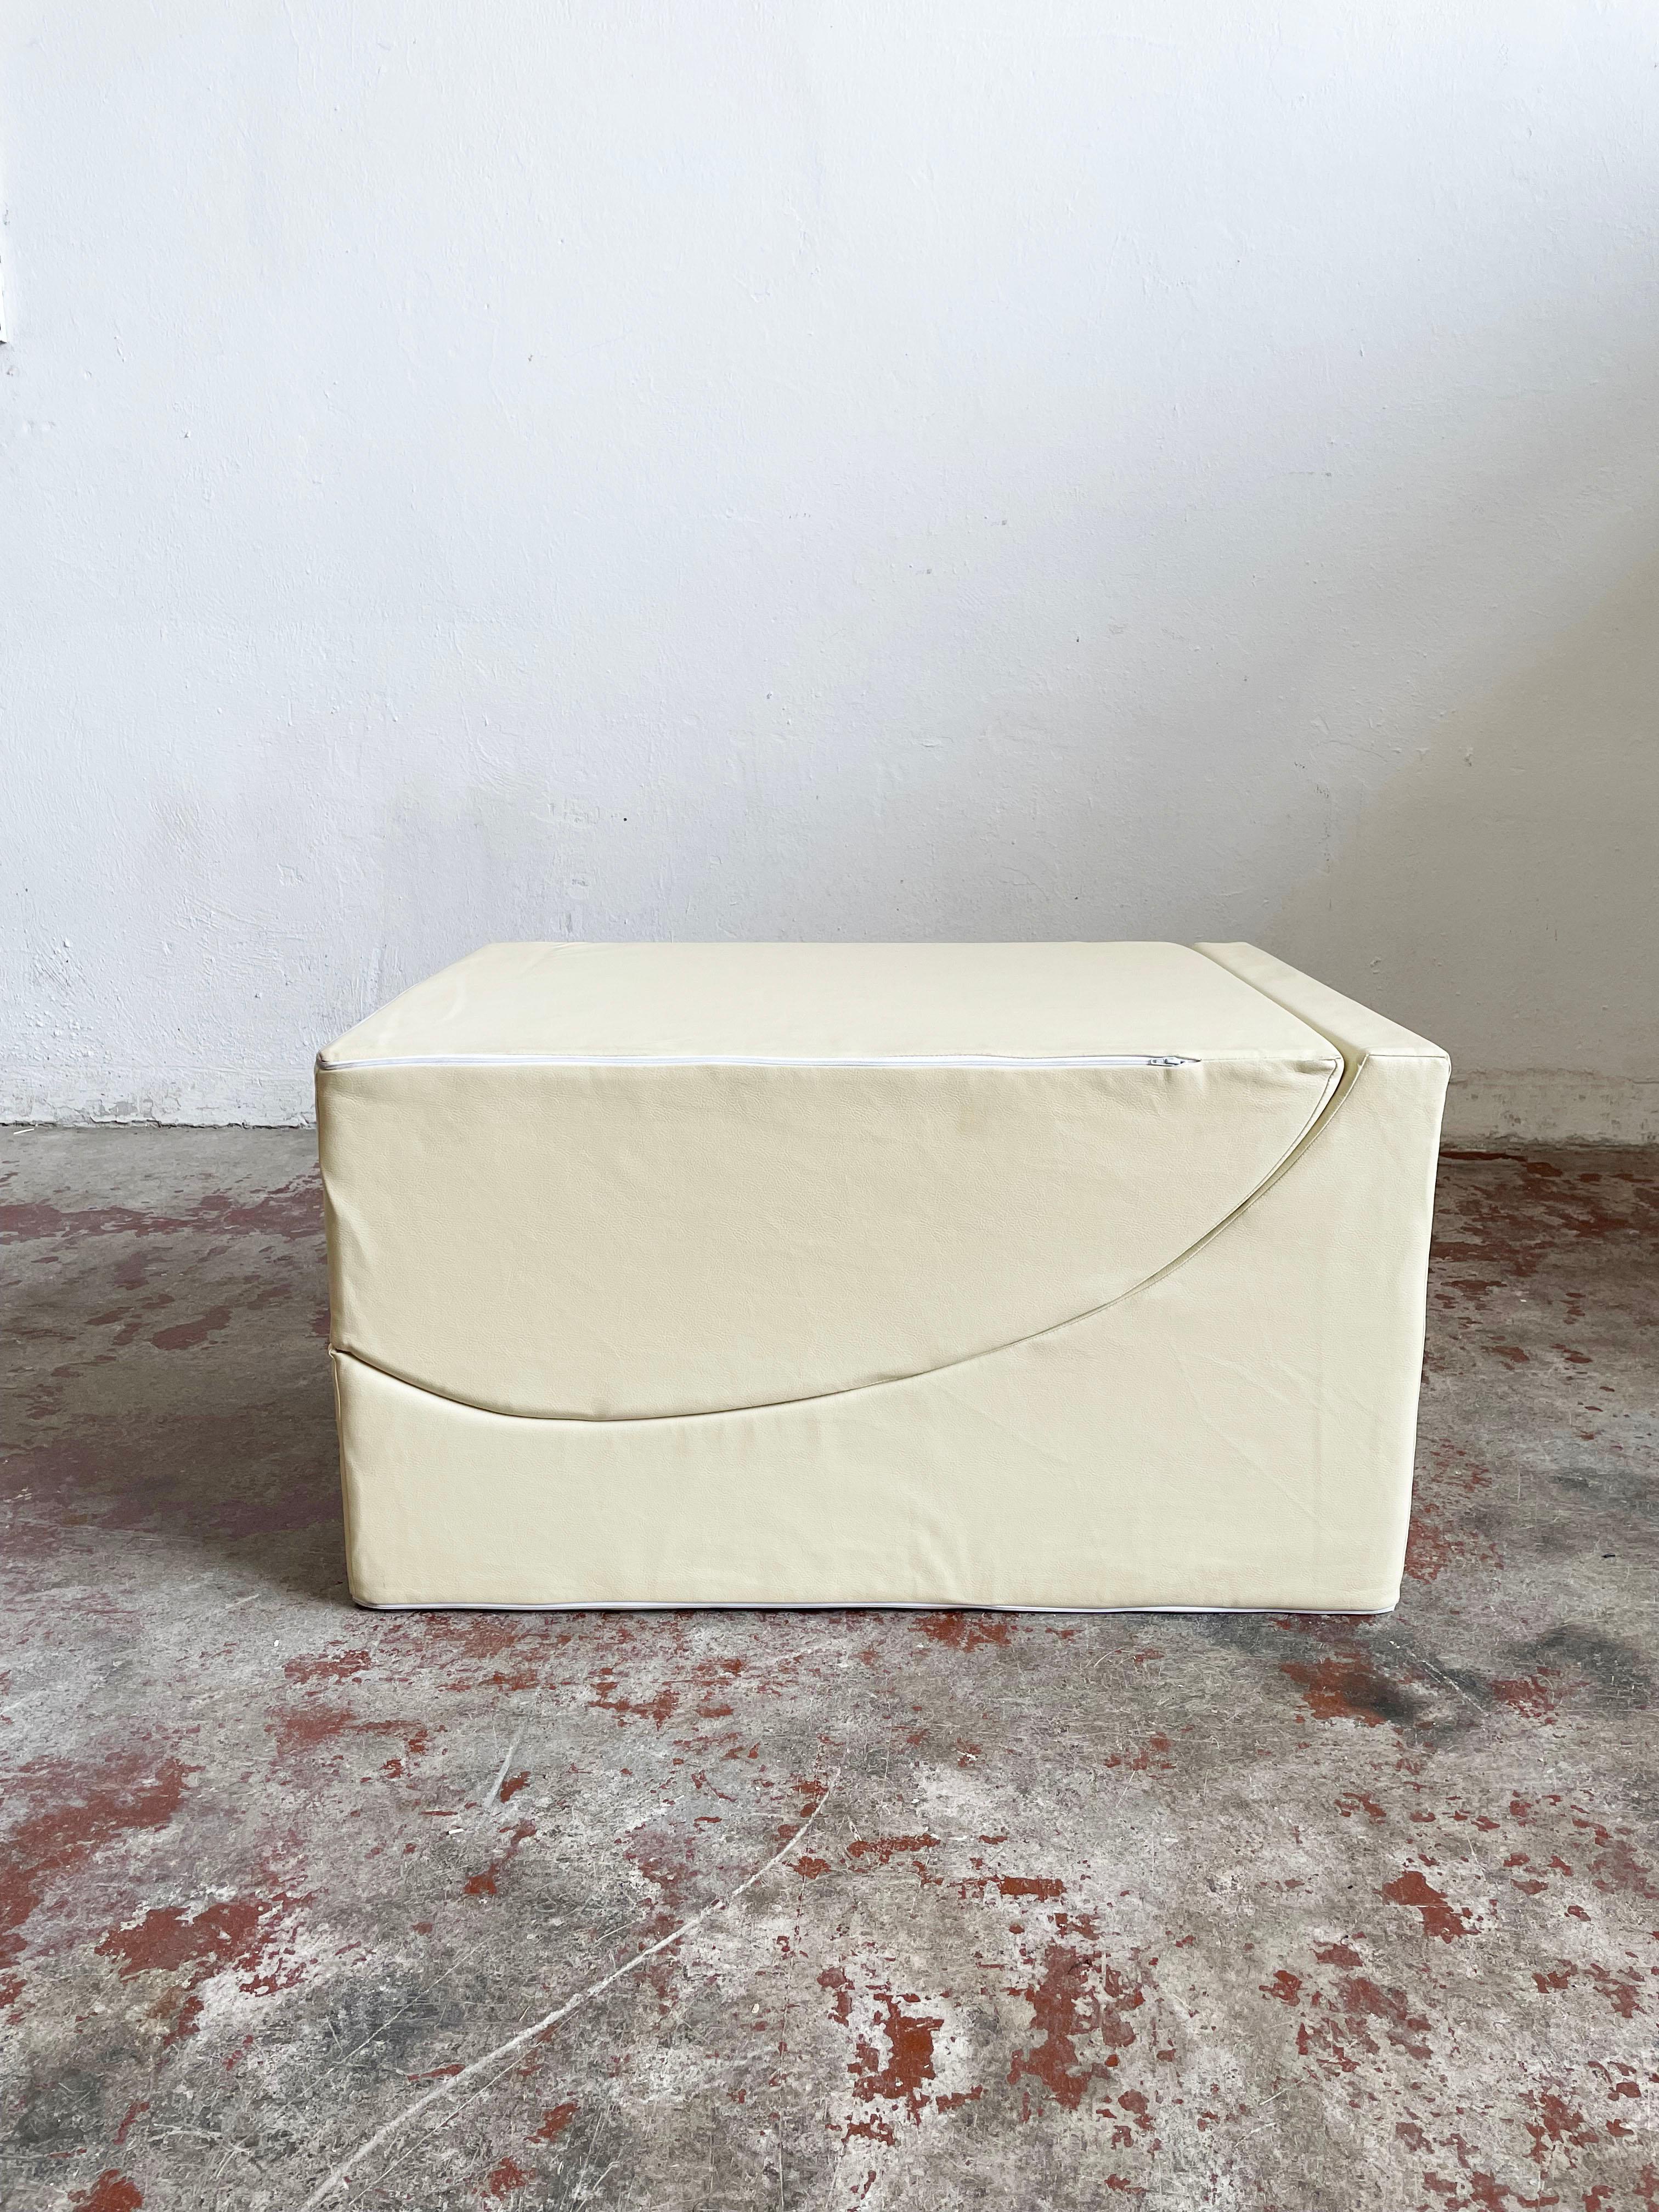 Sculptural folding lounge chair, foam padding covered with faux leather in ivory white color

Manufactured in Italy, 1970s

Stunning modernist minimalist form

Size: 44 x 153 x 60 cm (H/W/D), height of the seating 16 - 28 cm
When folded the